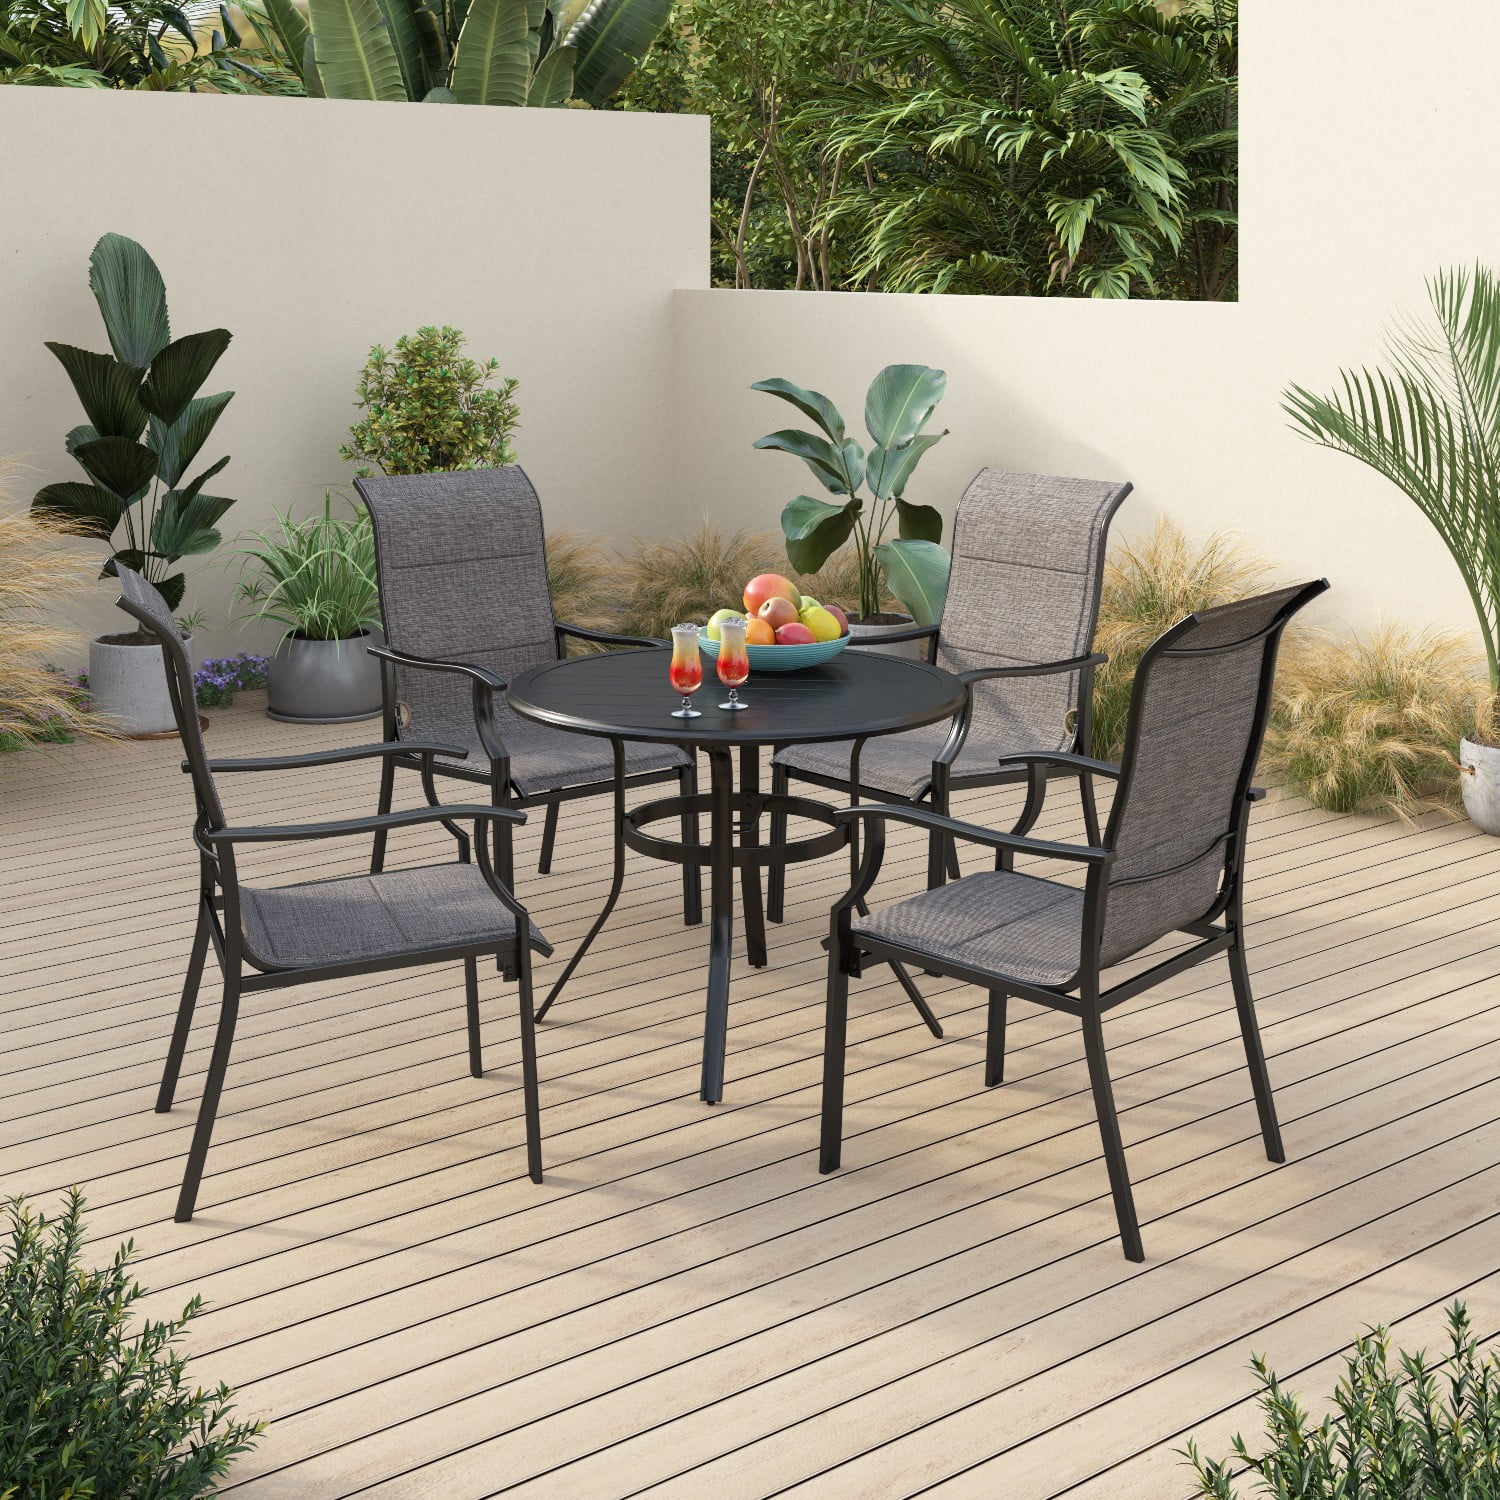 Sophia & William Patio Dining Set 7 Pieces Patio Furniture Set for 6 Aluminium Patio Dining Chairs Stackable with 1 Expandable 6-8 Person Dining Table Patio Set for Outdoor Lawn Garden Backyard Pool 